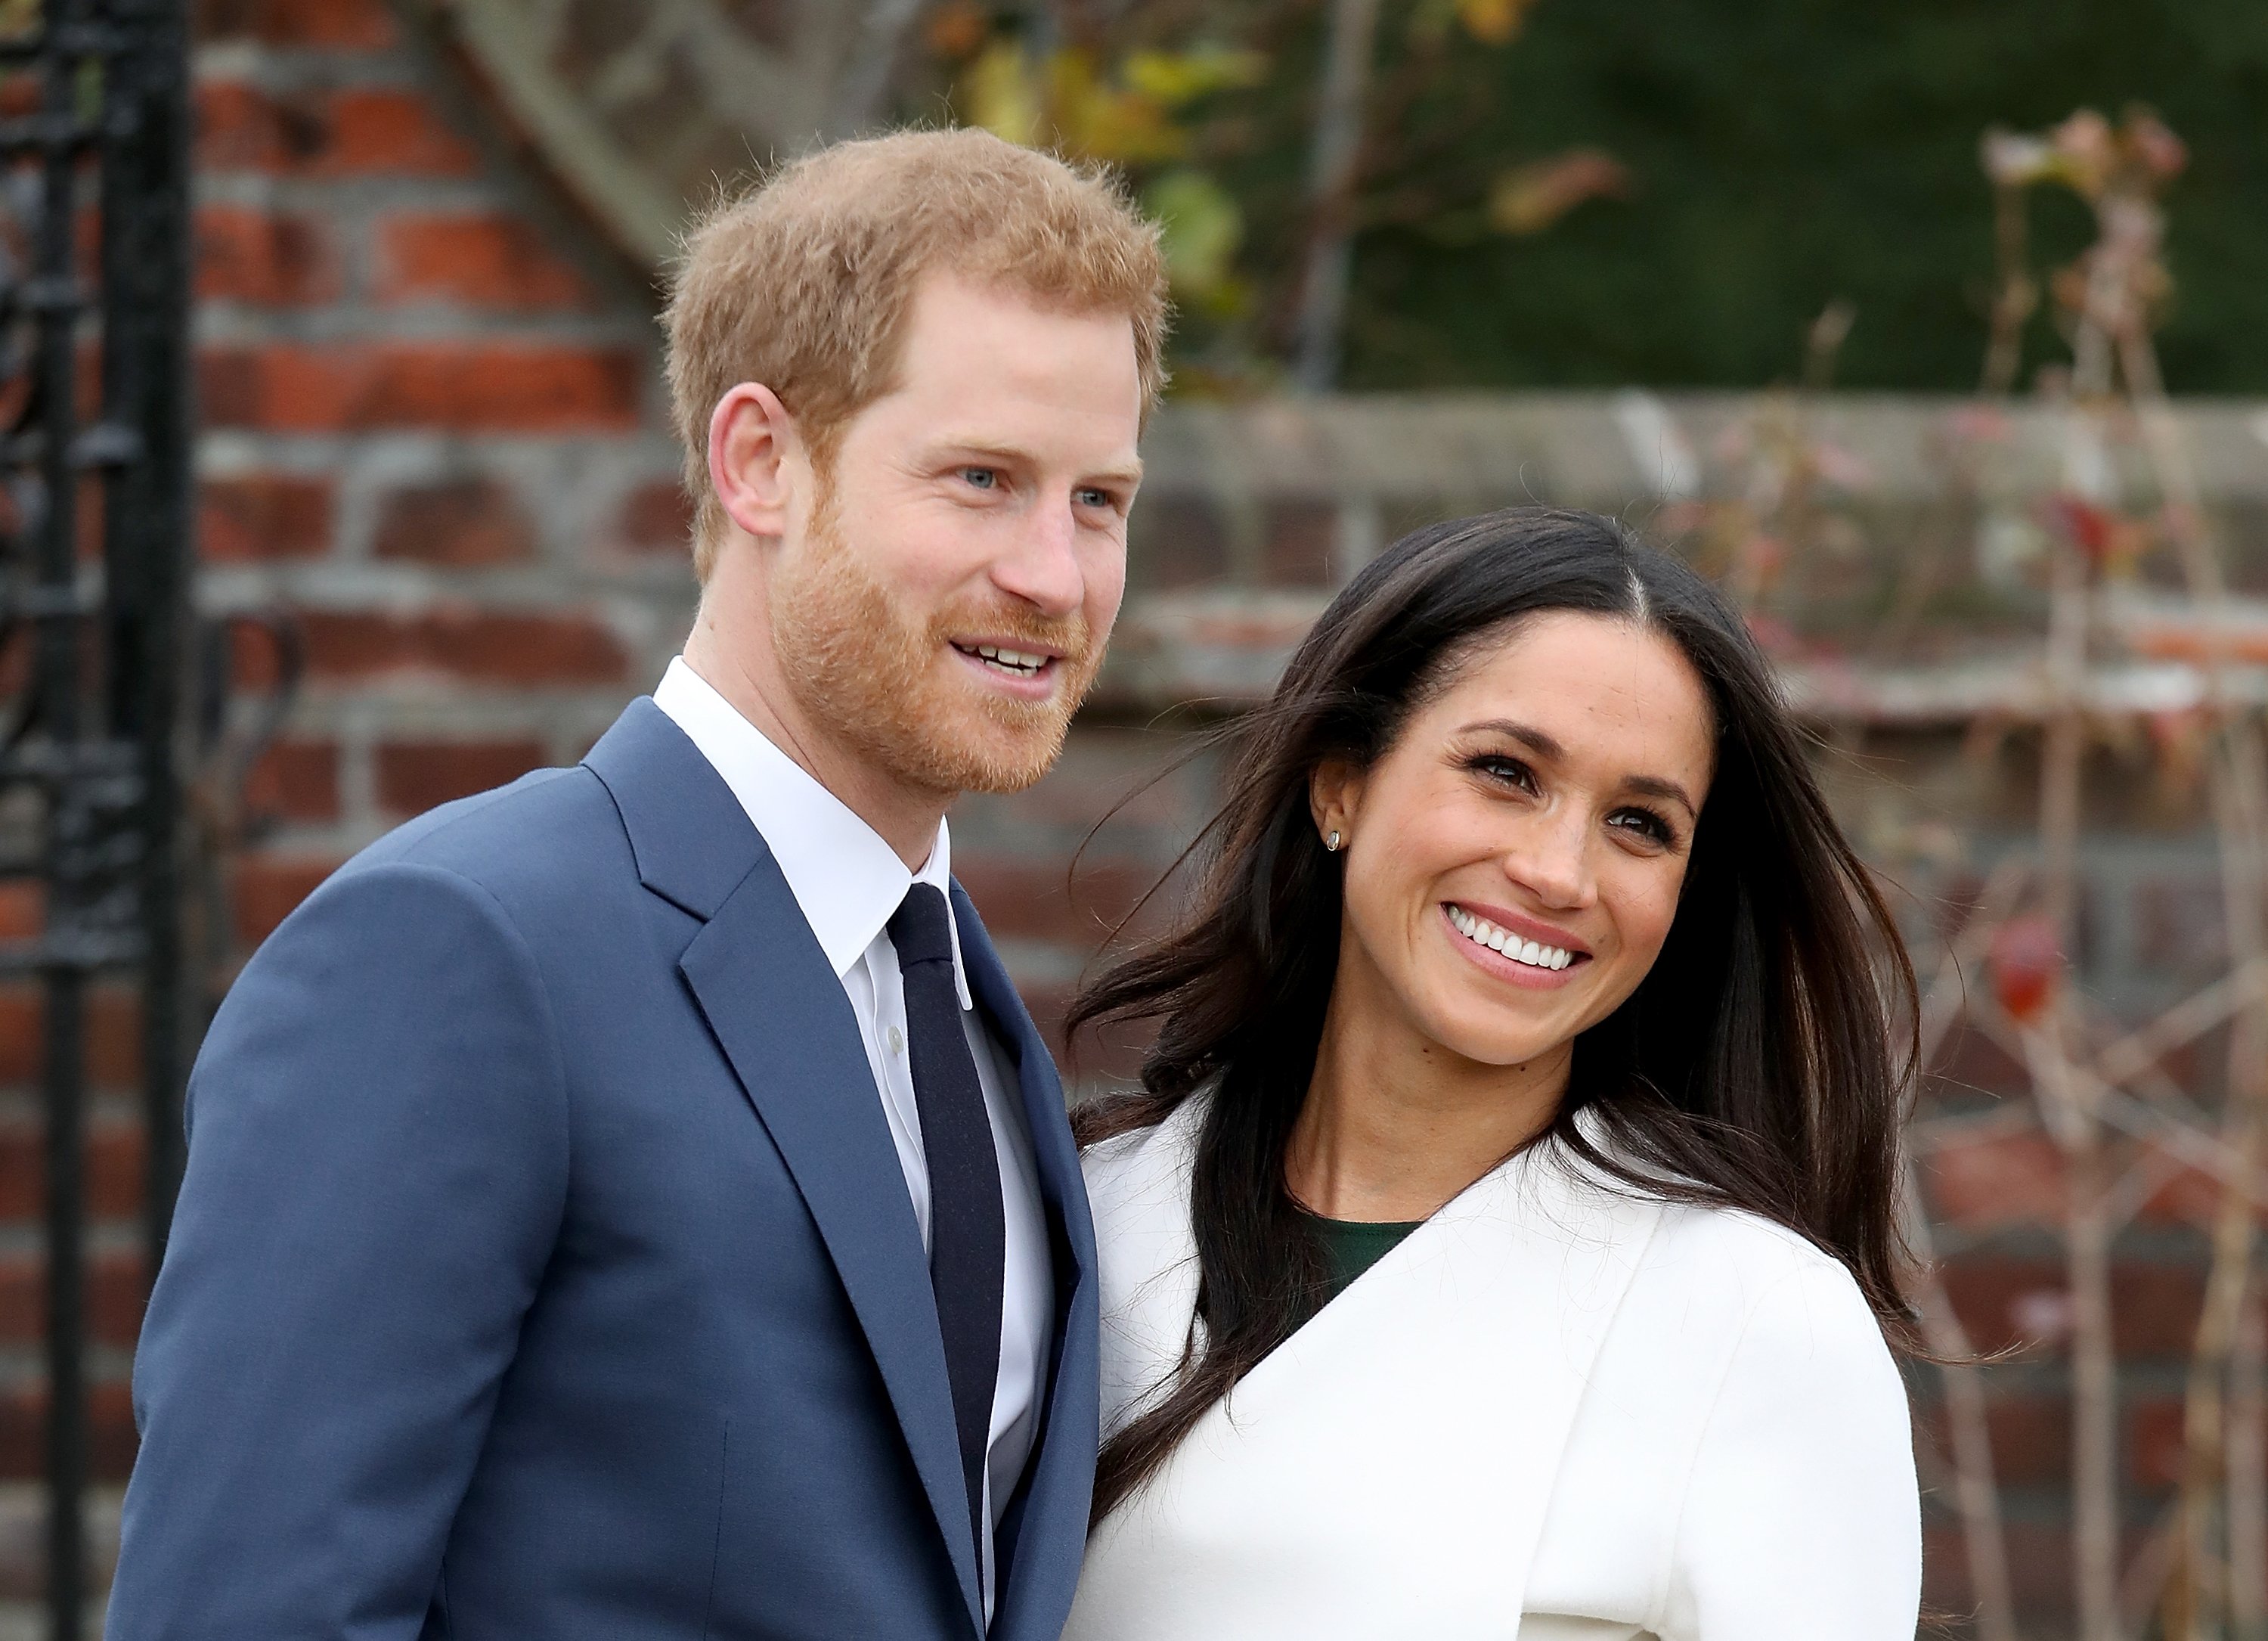  Prince Harry and actress Meghan Markle during an official photocall to announce their engagement at The Sunken Gardens at Kensington Palace on November 27, 2017 in London, England. | Source: Getty Images